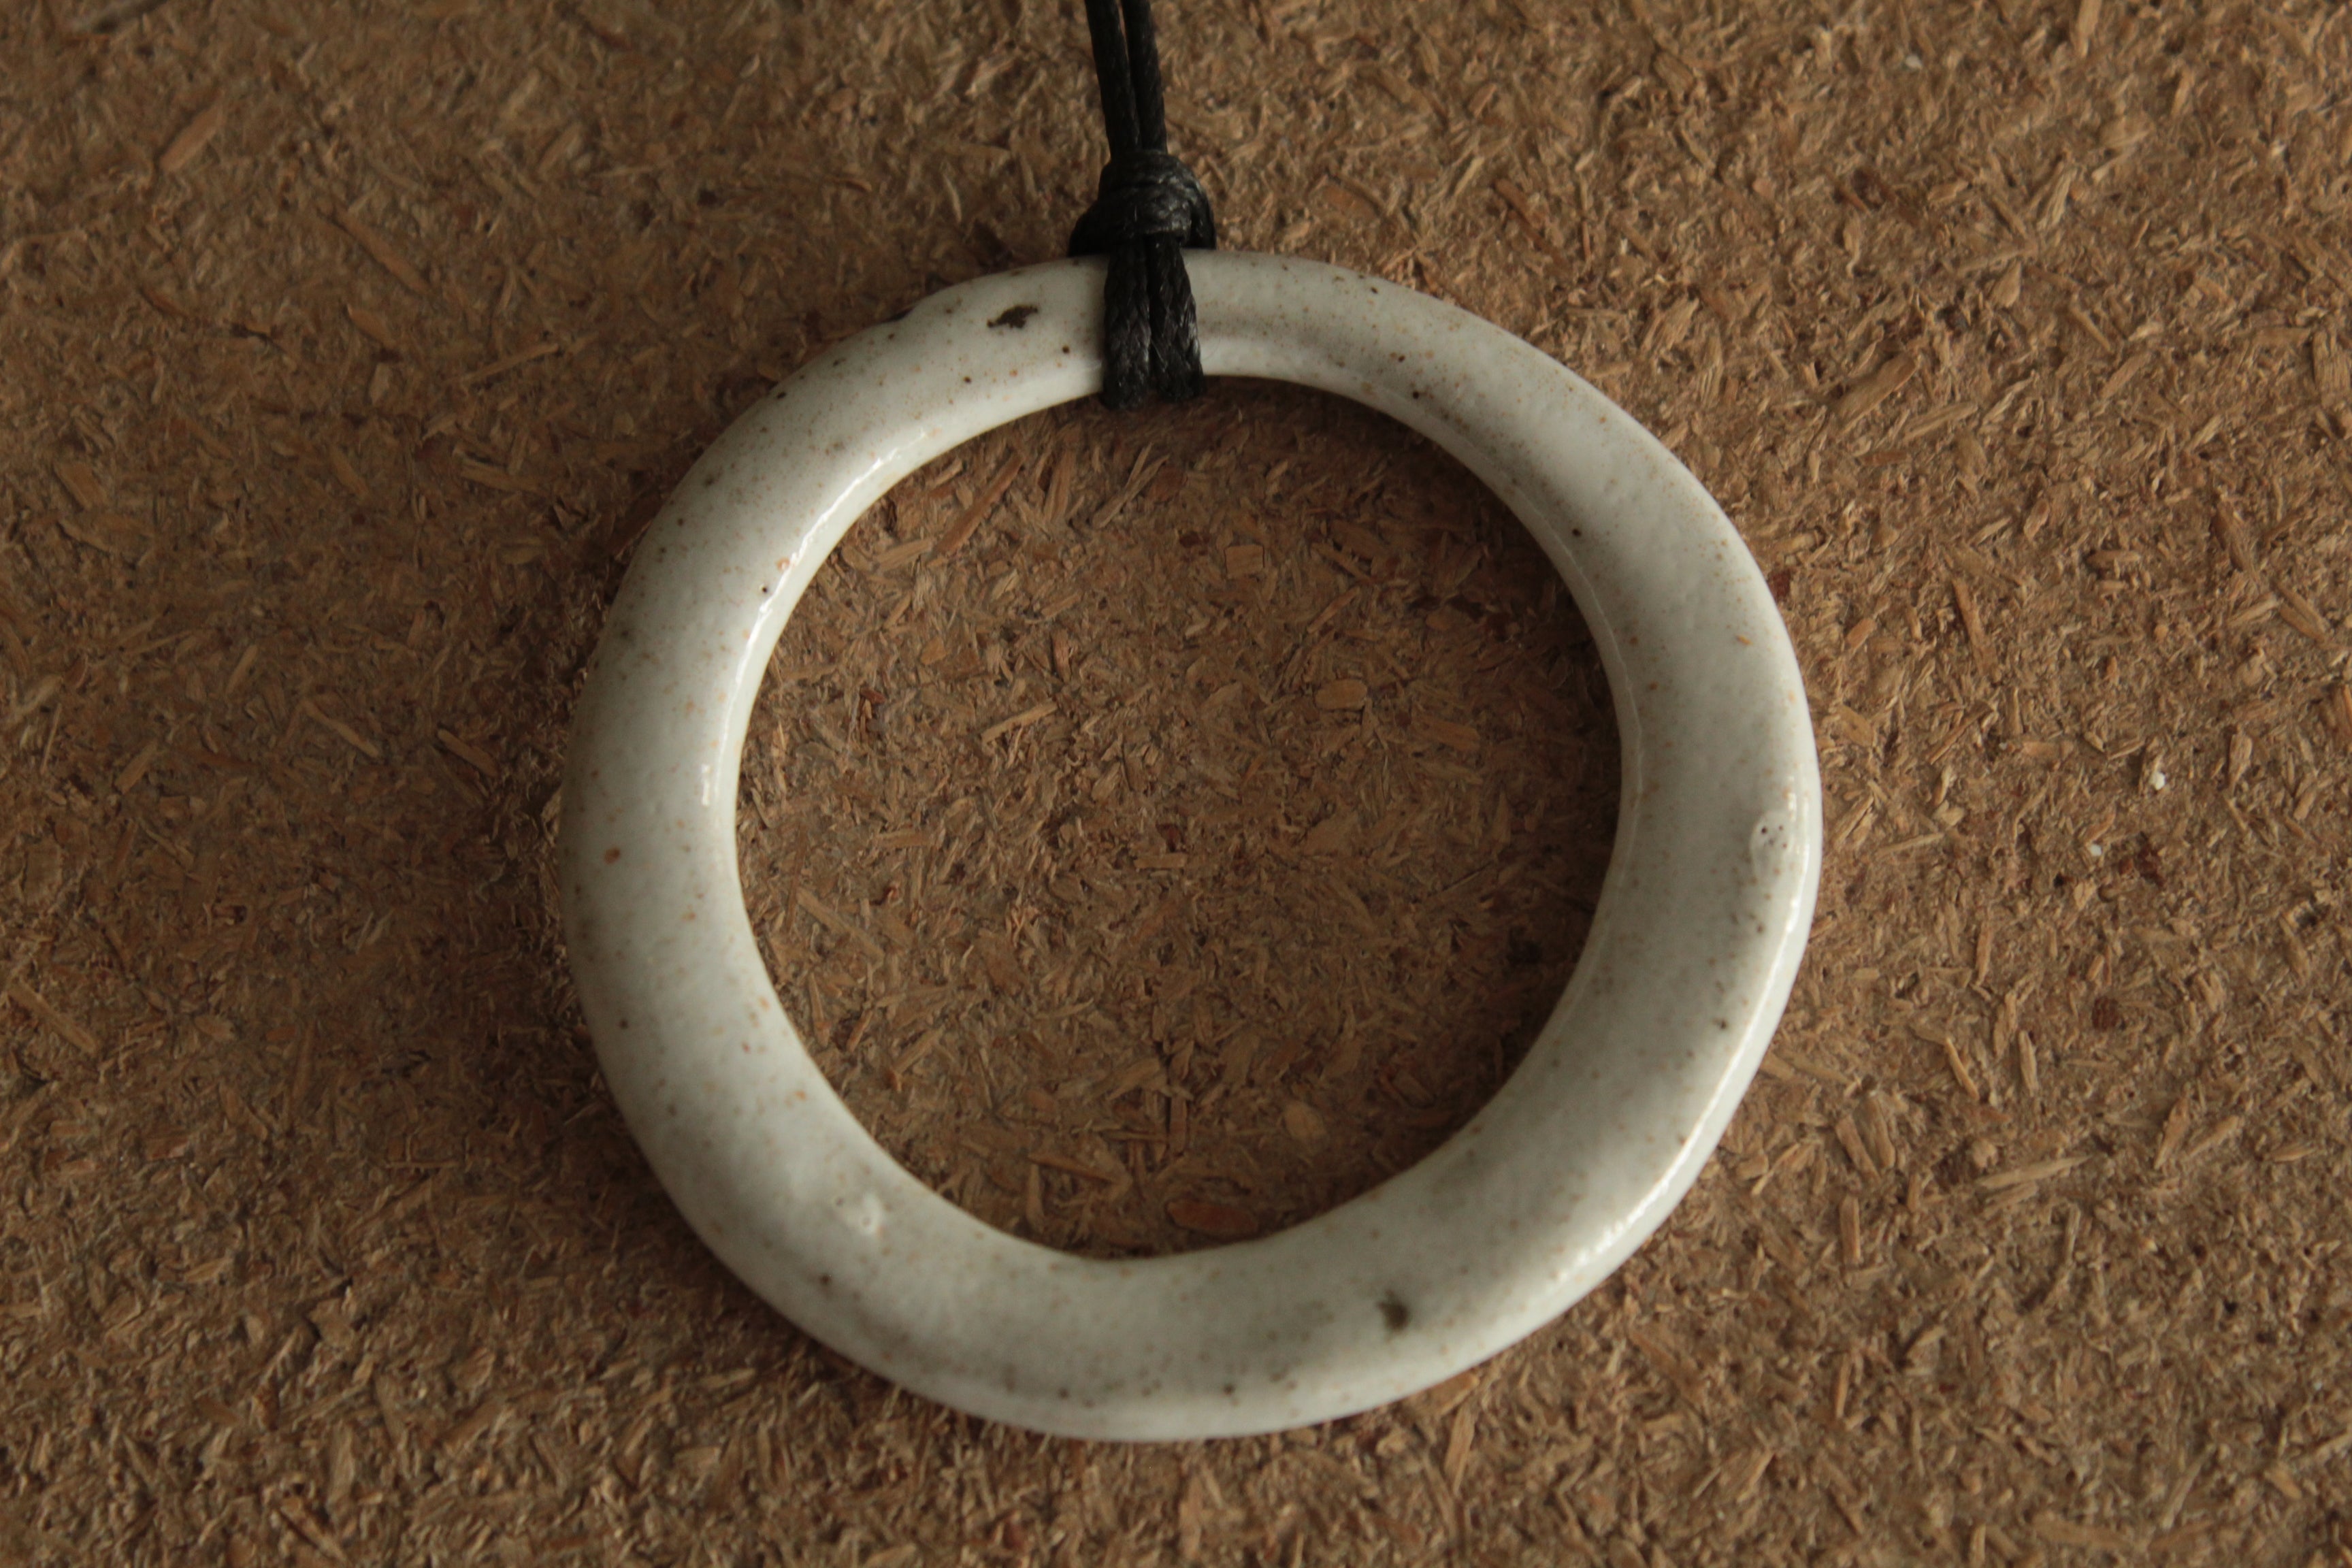 White hoop necklace